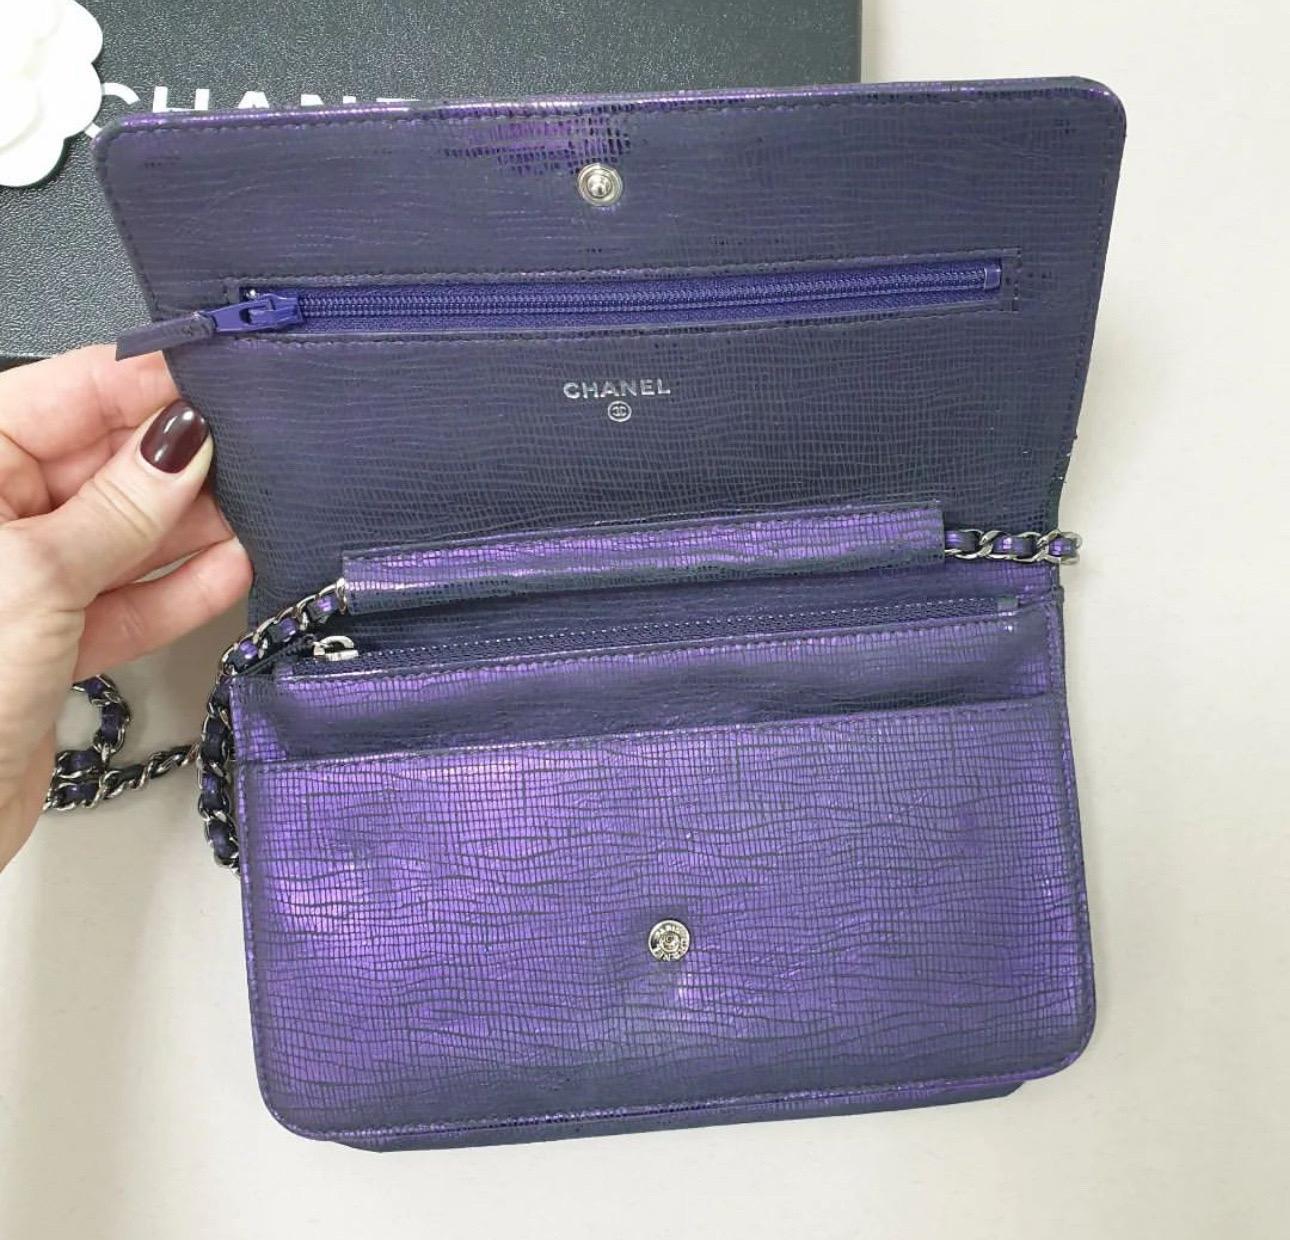 Chanel Purple Metallic Crackling Lizard Printed Timeless WOC In Fair Condition For Sale In Krakow, PL